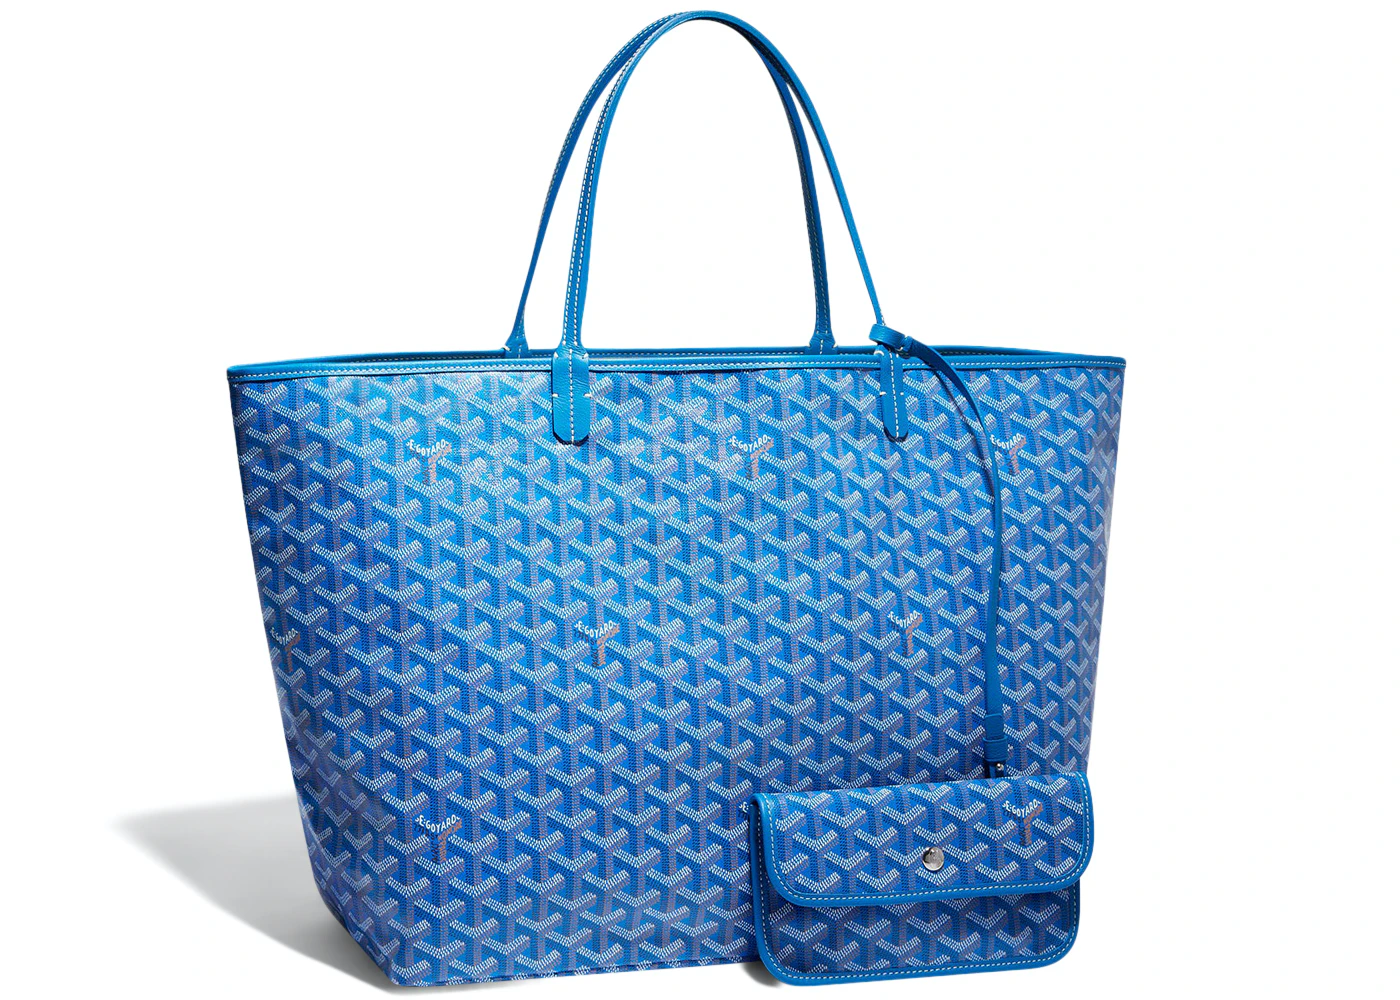 Buy Goyard Tote Bags, Wallets and More - StockX